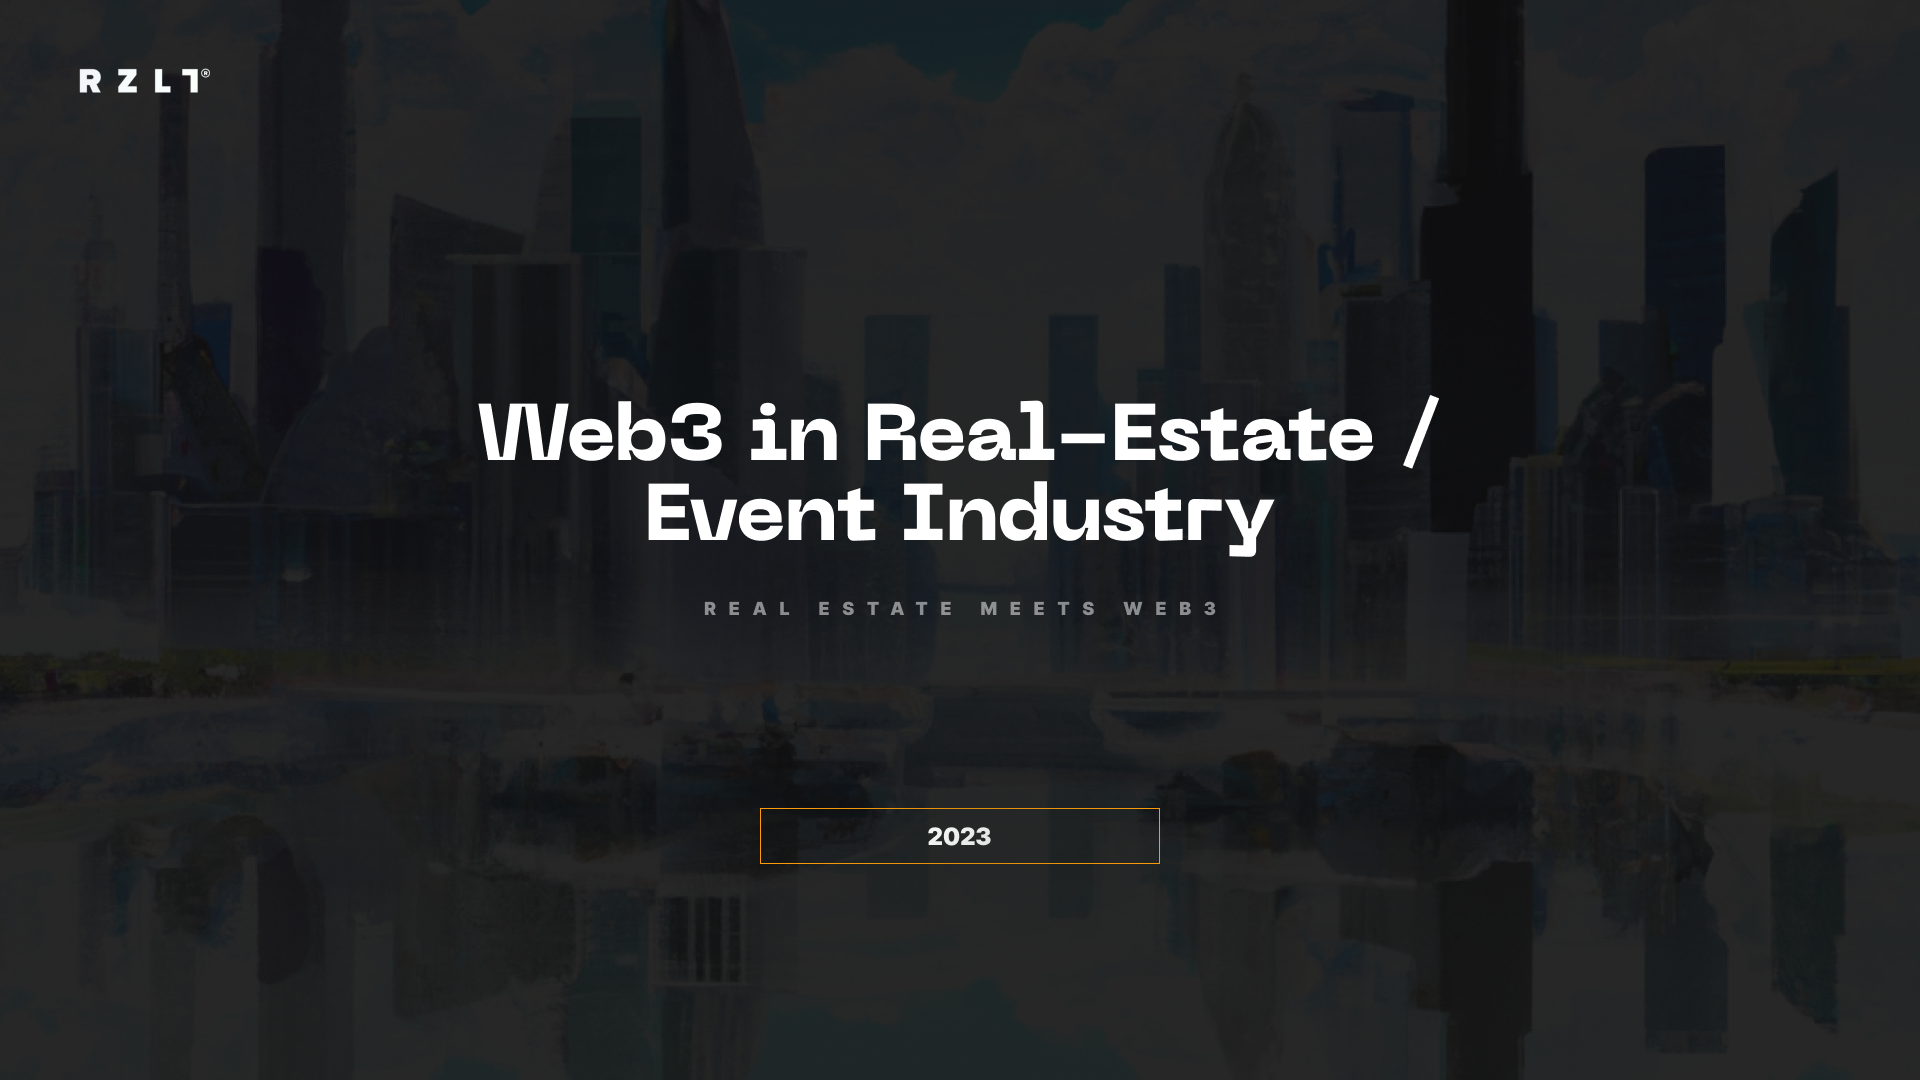 Web3 in Real-Estate / Event Industry